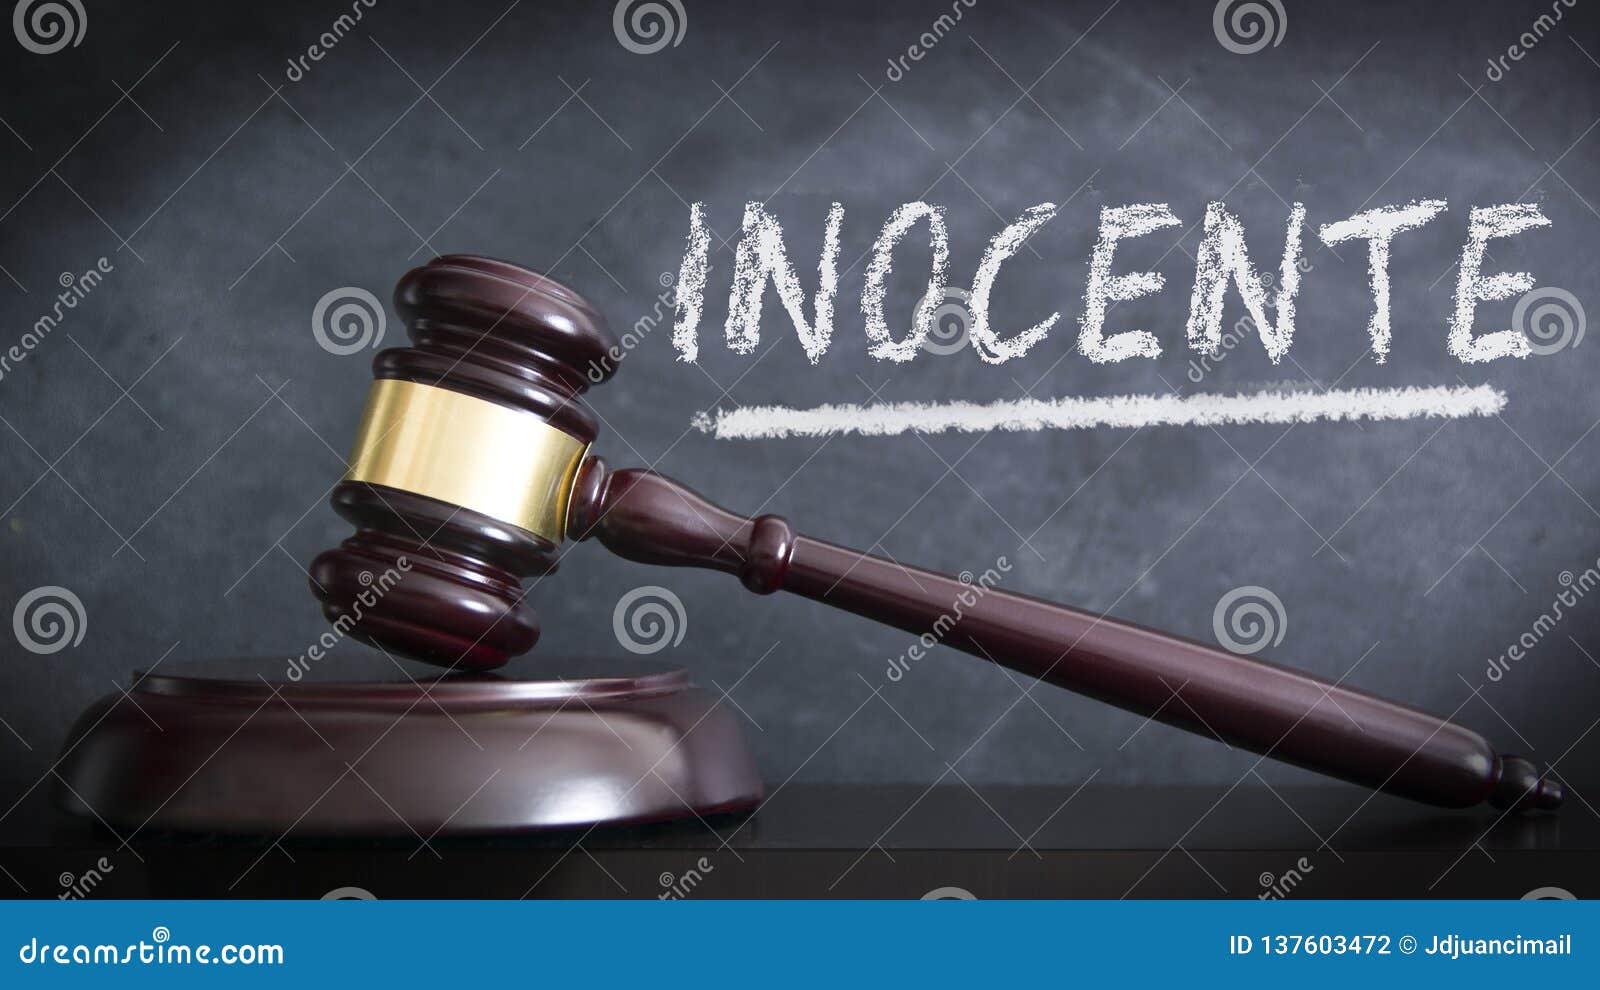 wooden hammer in a courthouse at verdict of innocent in spanish `inocente` in a judgement. hand written concept with chalk